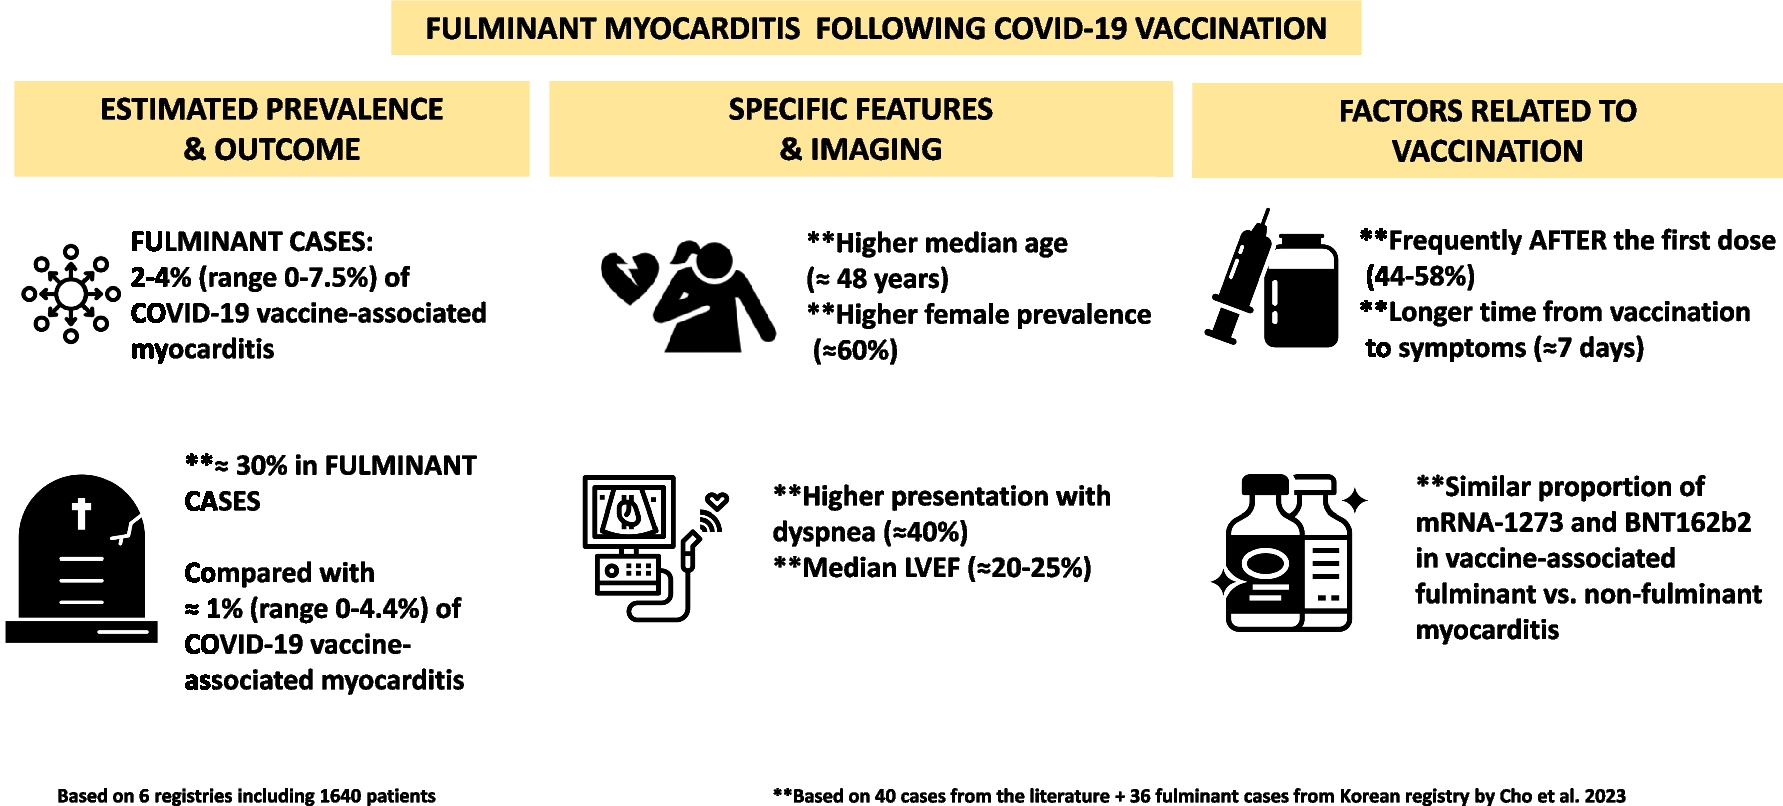 Fulminant Myocarditis Temporally Associated with COVID-19 Vaccination